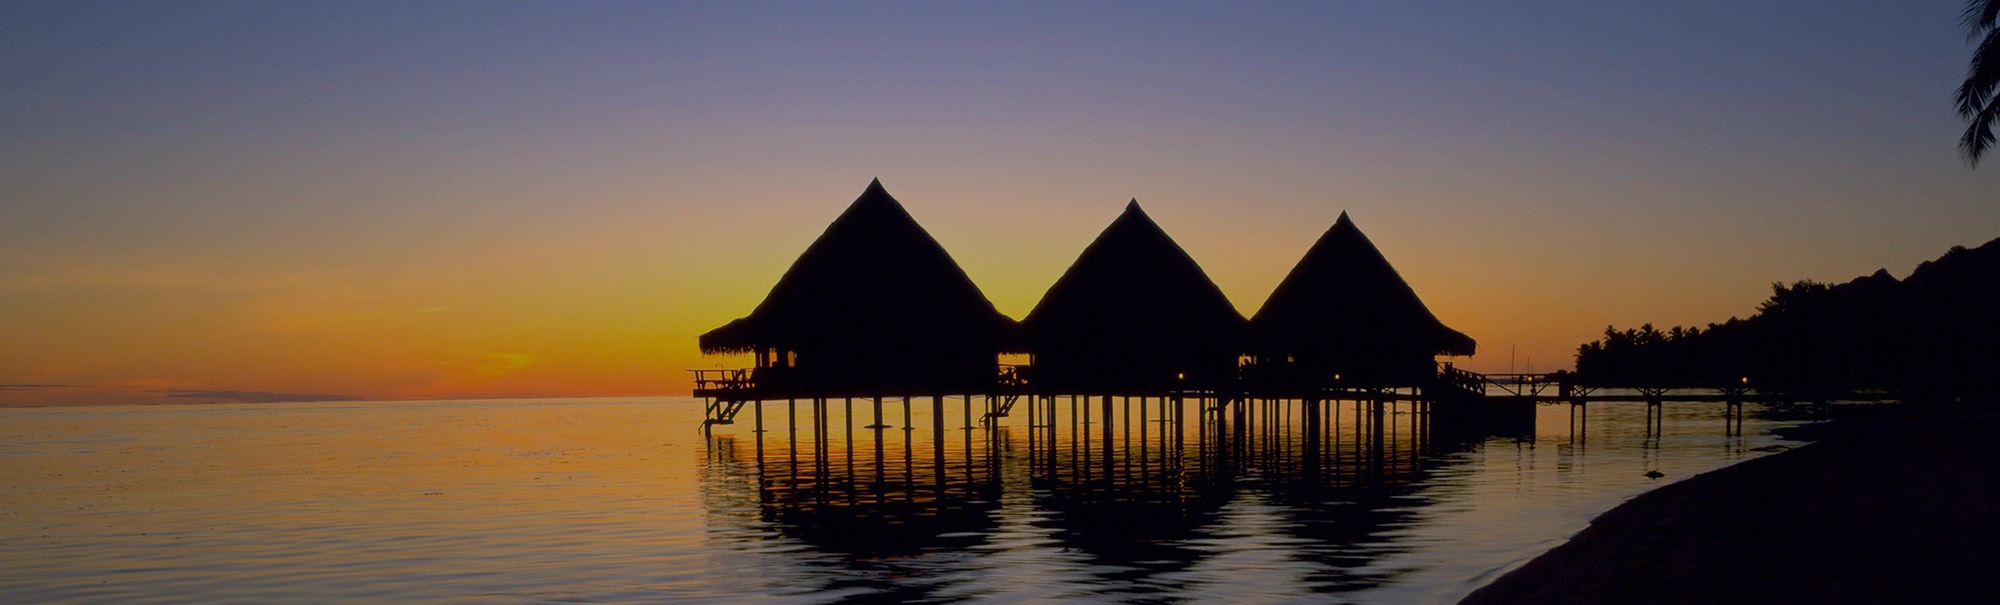 The Birth of the Overwater Bungalow